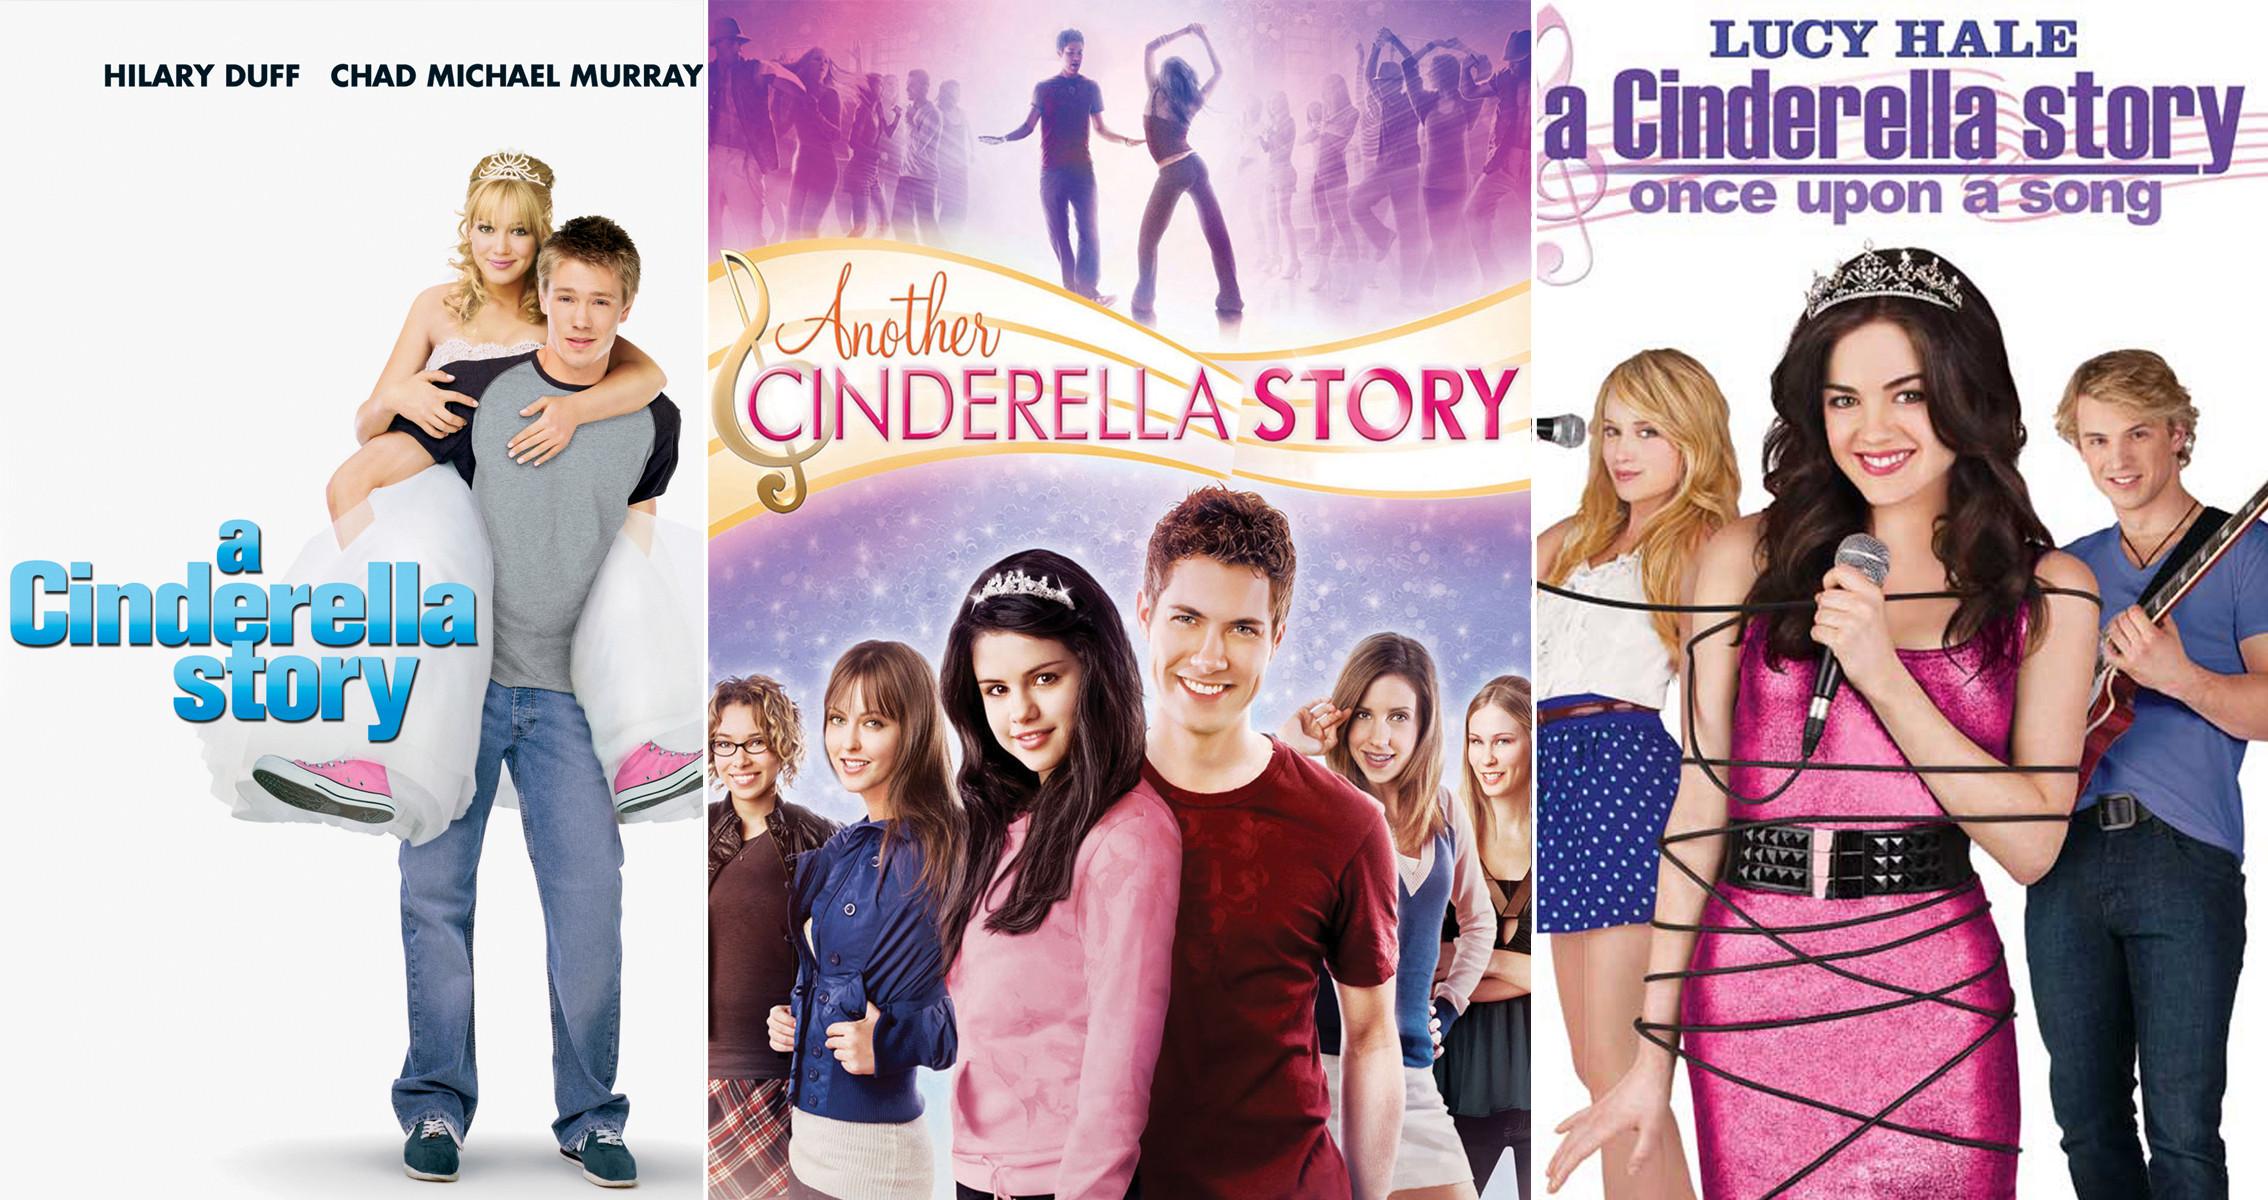 Another cinderella story dress